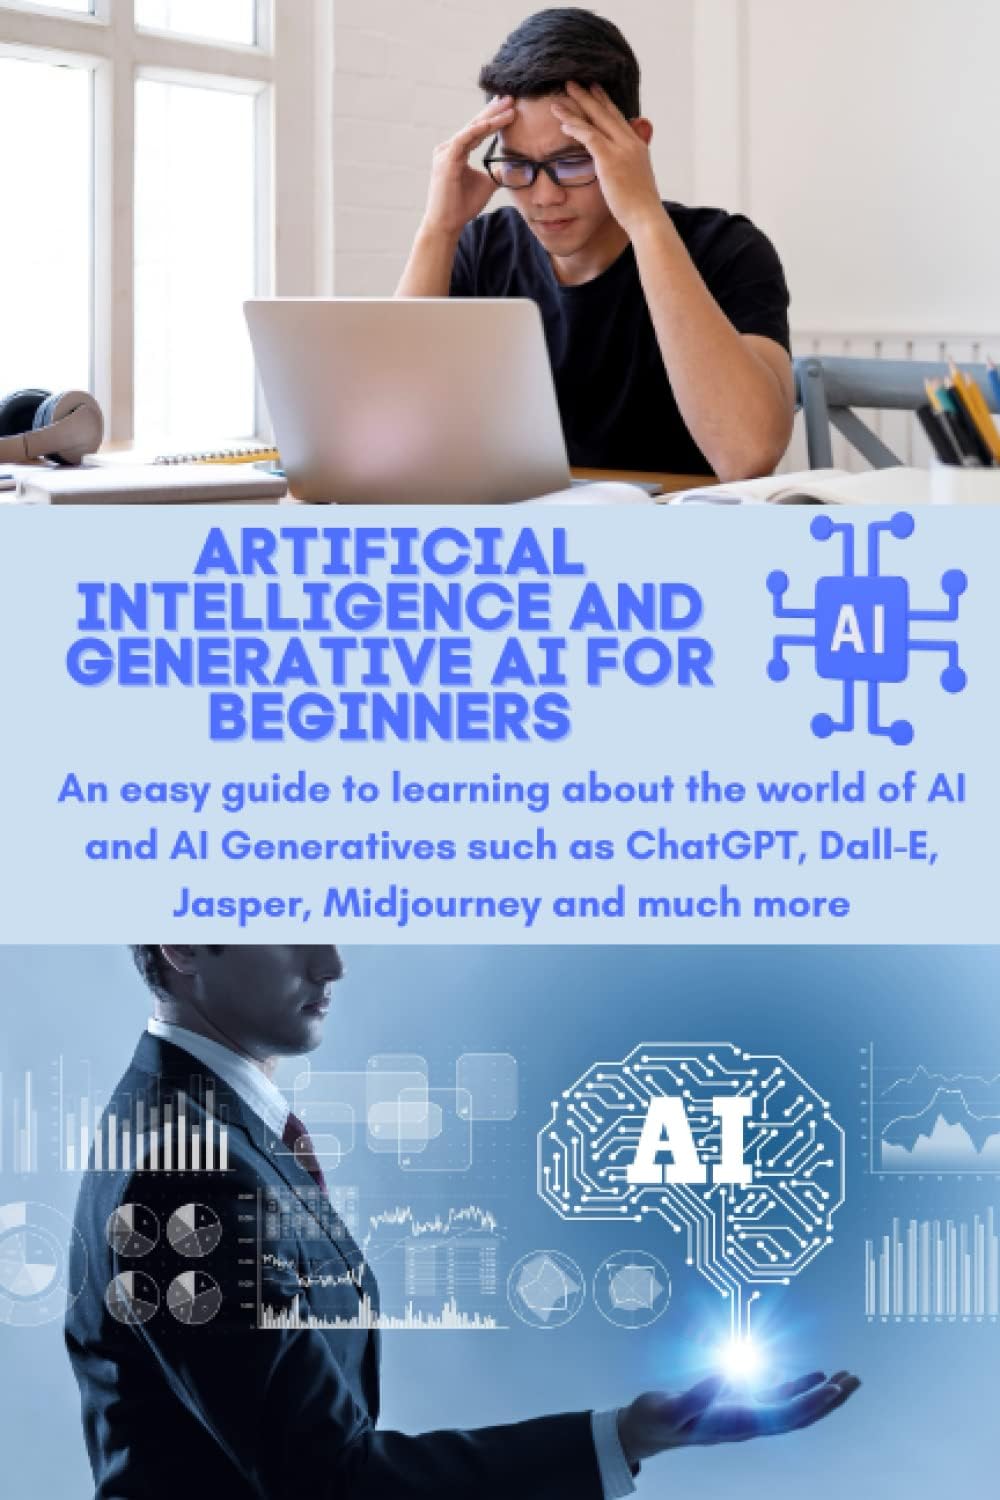 ARTIFICIAL INTELLIGENCE AND GENERATIVE AI FOR BEGINNERS: An easy guide to learning about the world of AI and AI Generatives such as ChatGPT, Dall-E, Jasper, Midjourney and much more